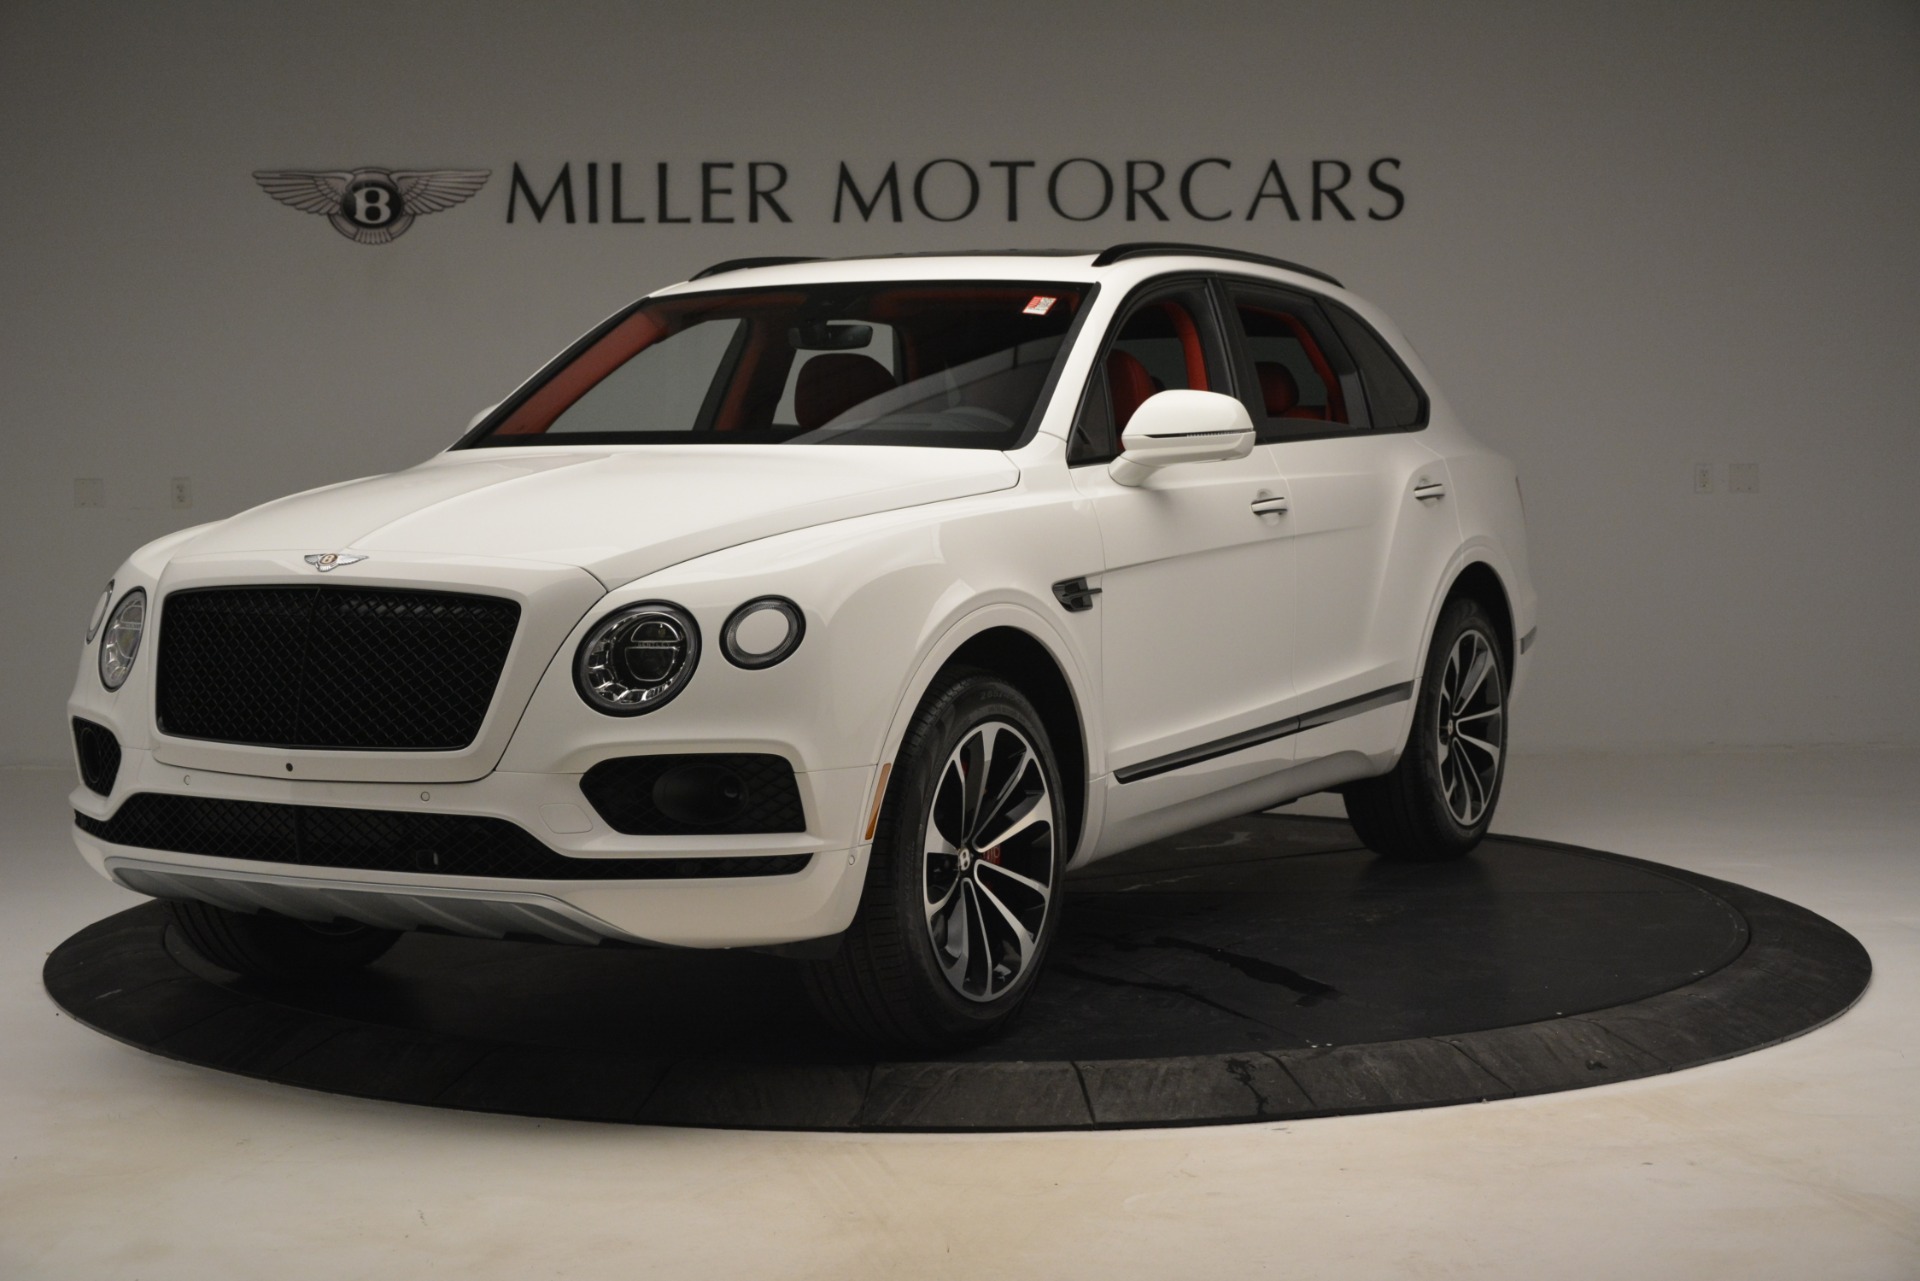 New 2019 Bentley Bentayga V8 for sale Sold at Alfa Romeo of Greenwich in Greenwich CT 06830 1